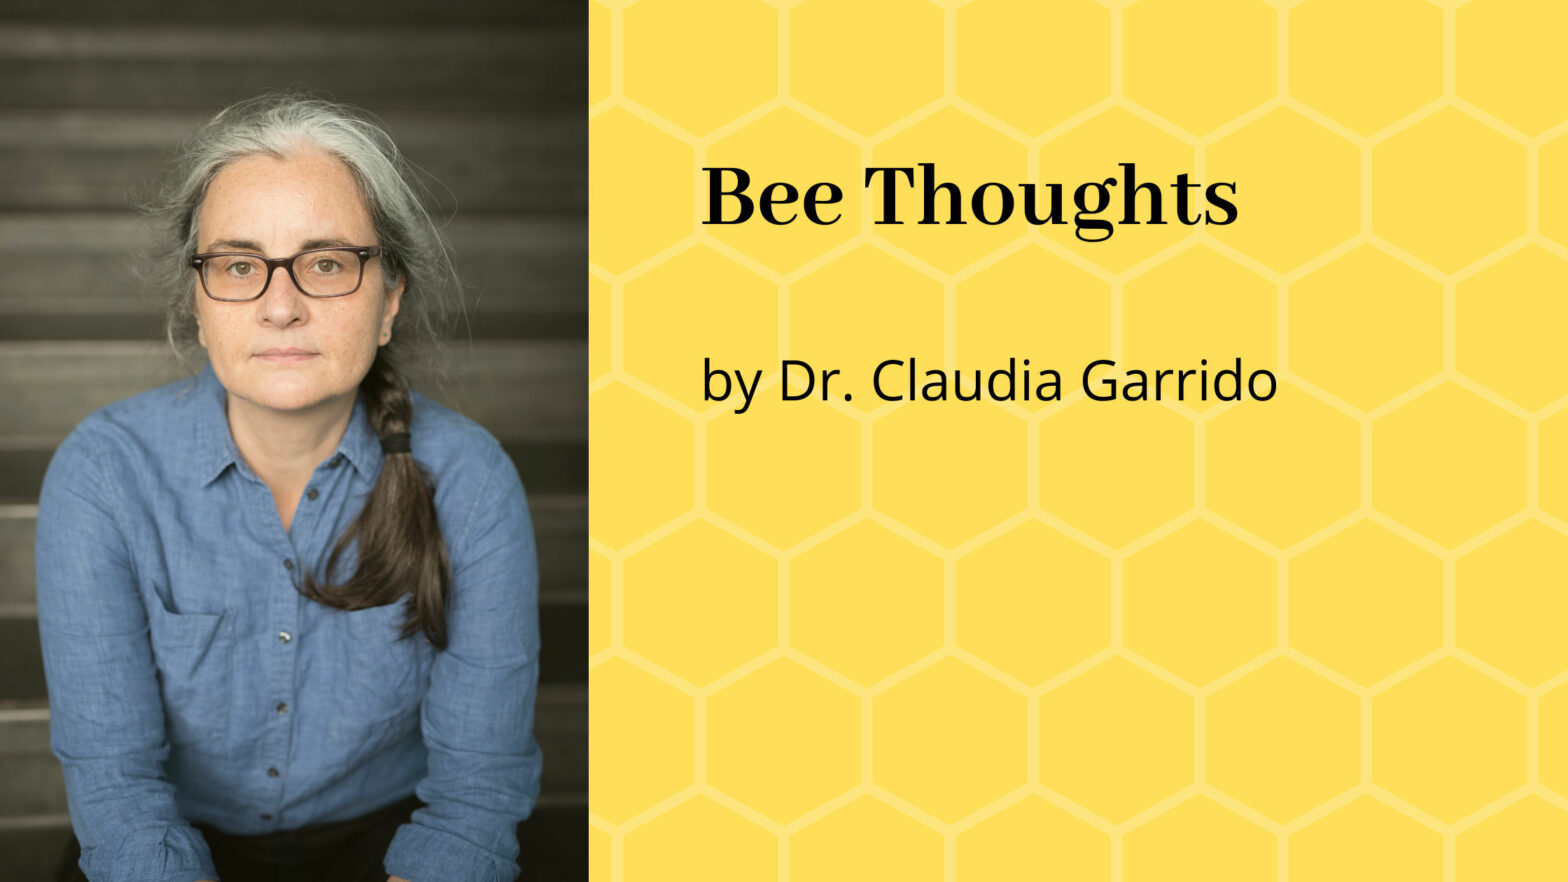 Bee nutrition and health